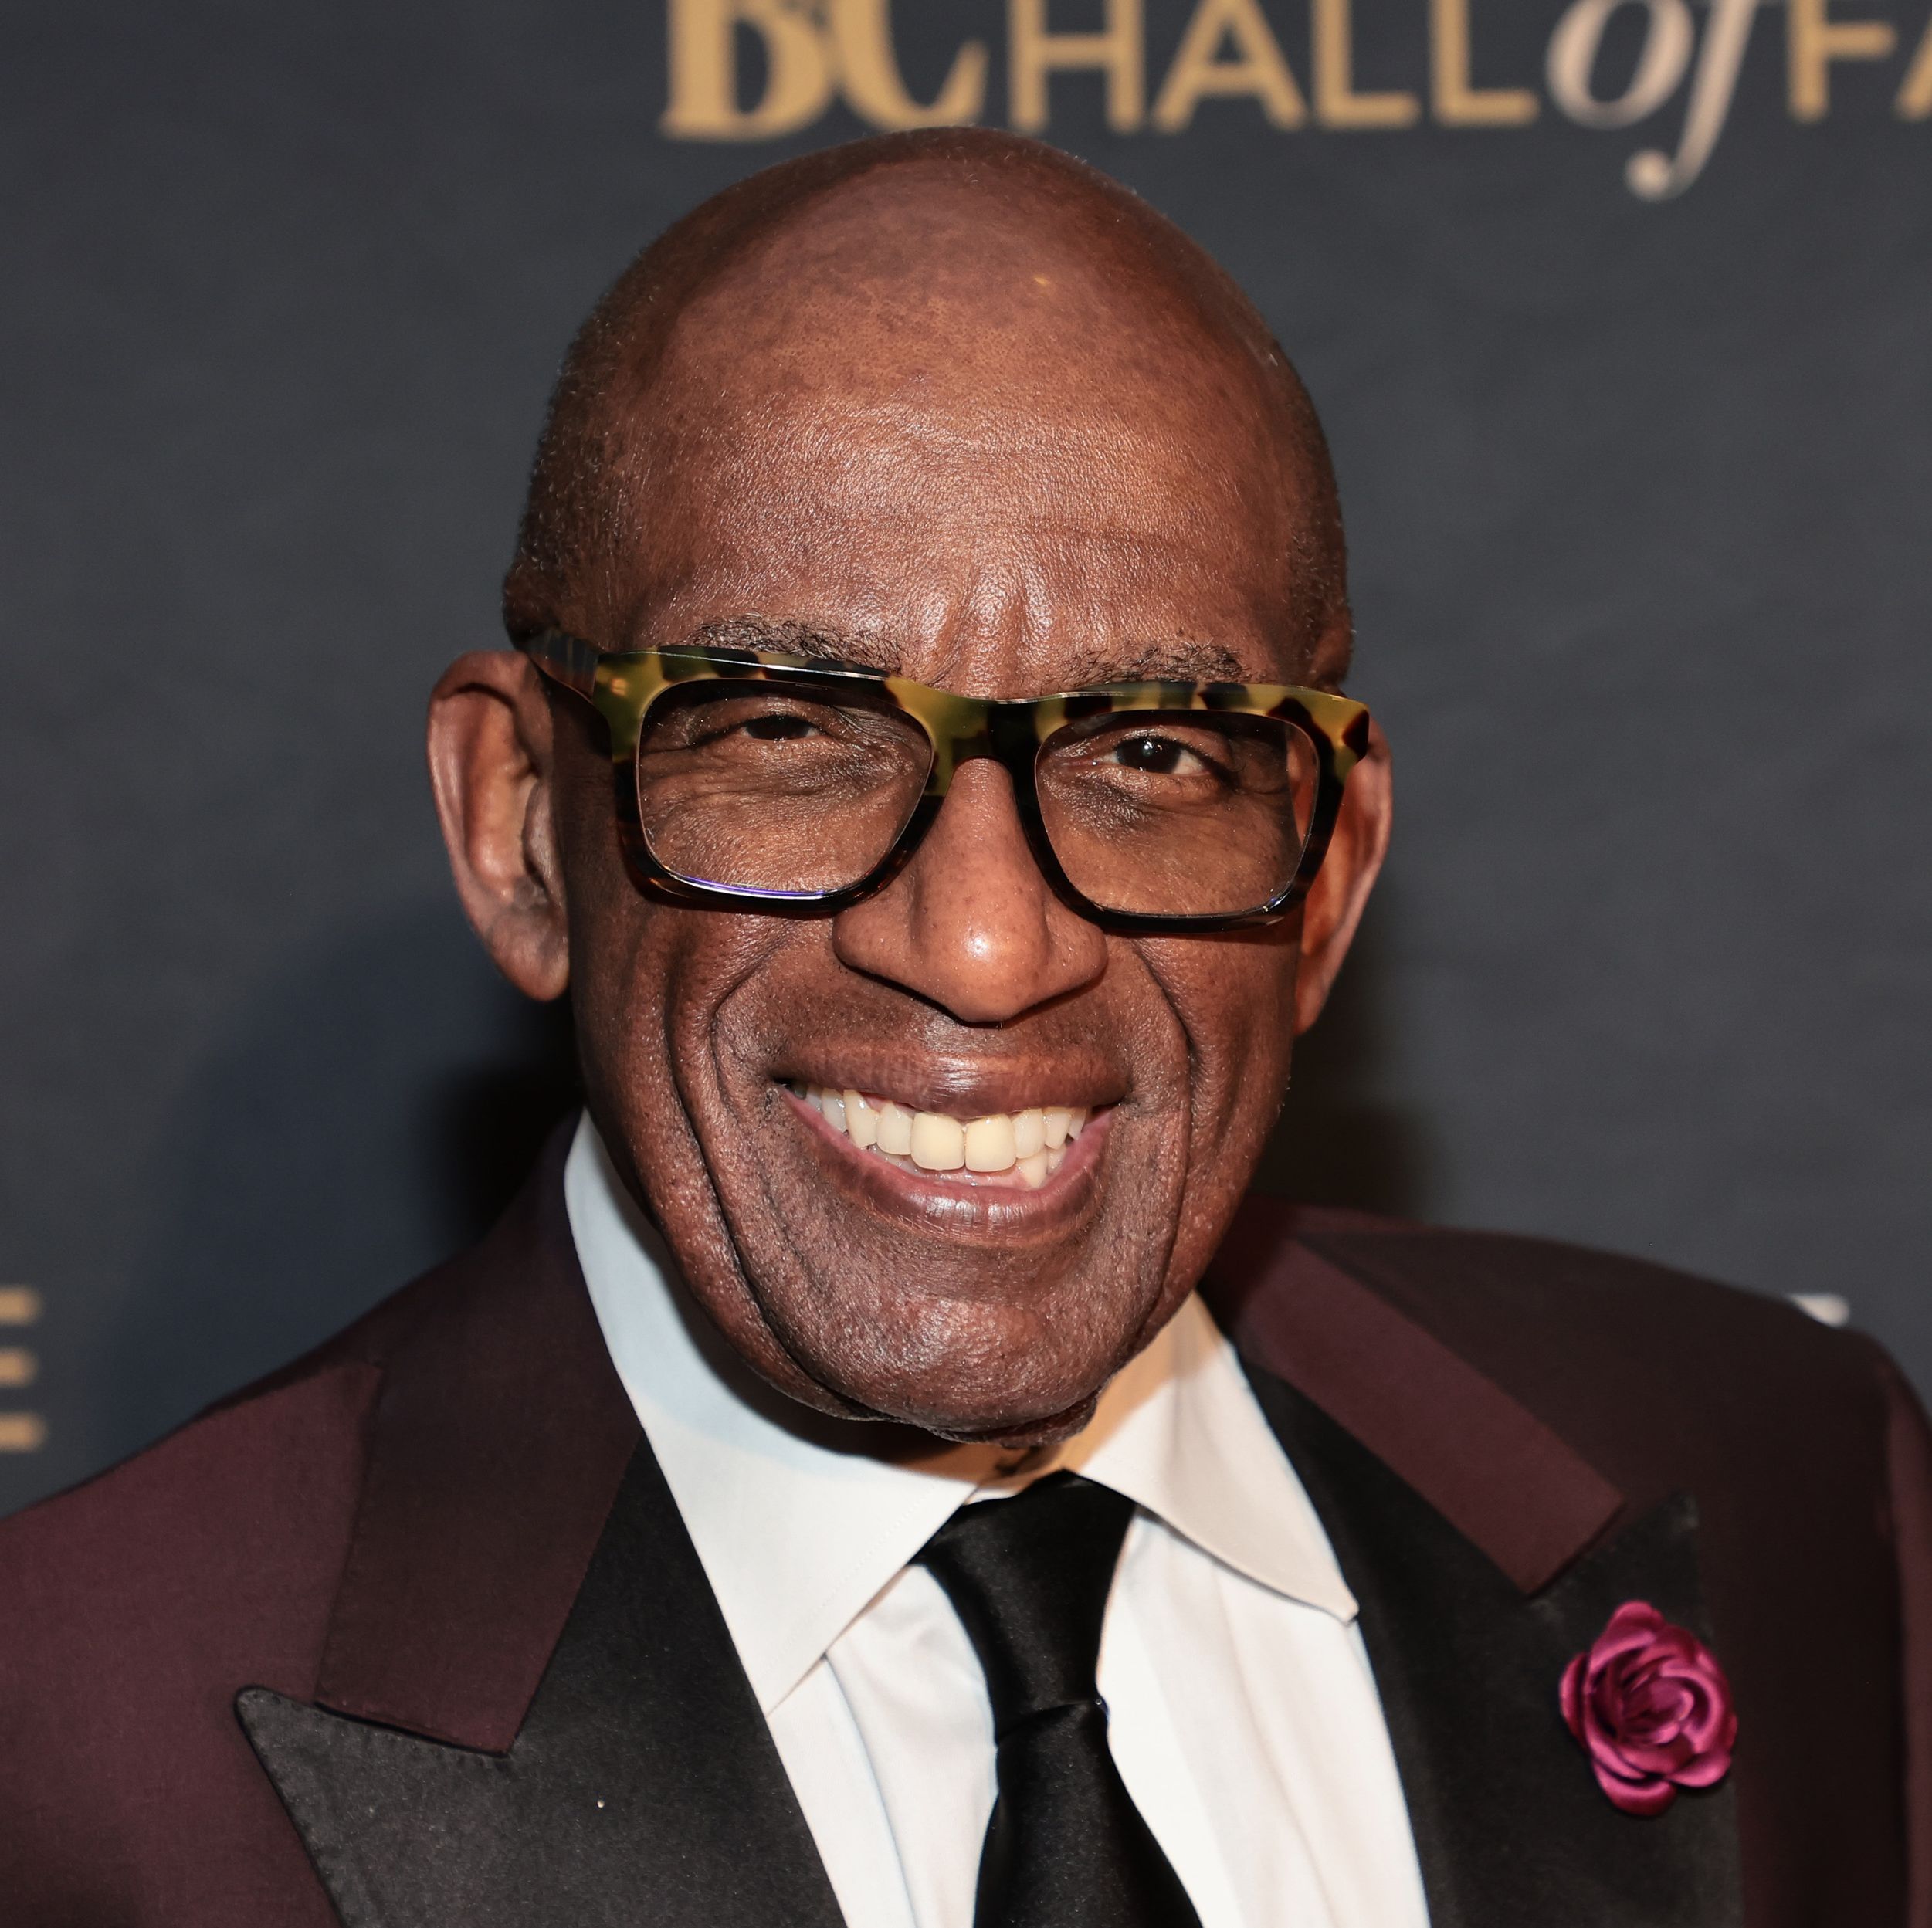 Al Roker Shared a Motivating Video of His Morning Workout